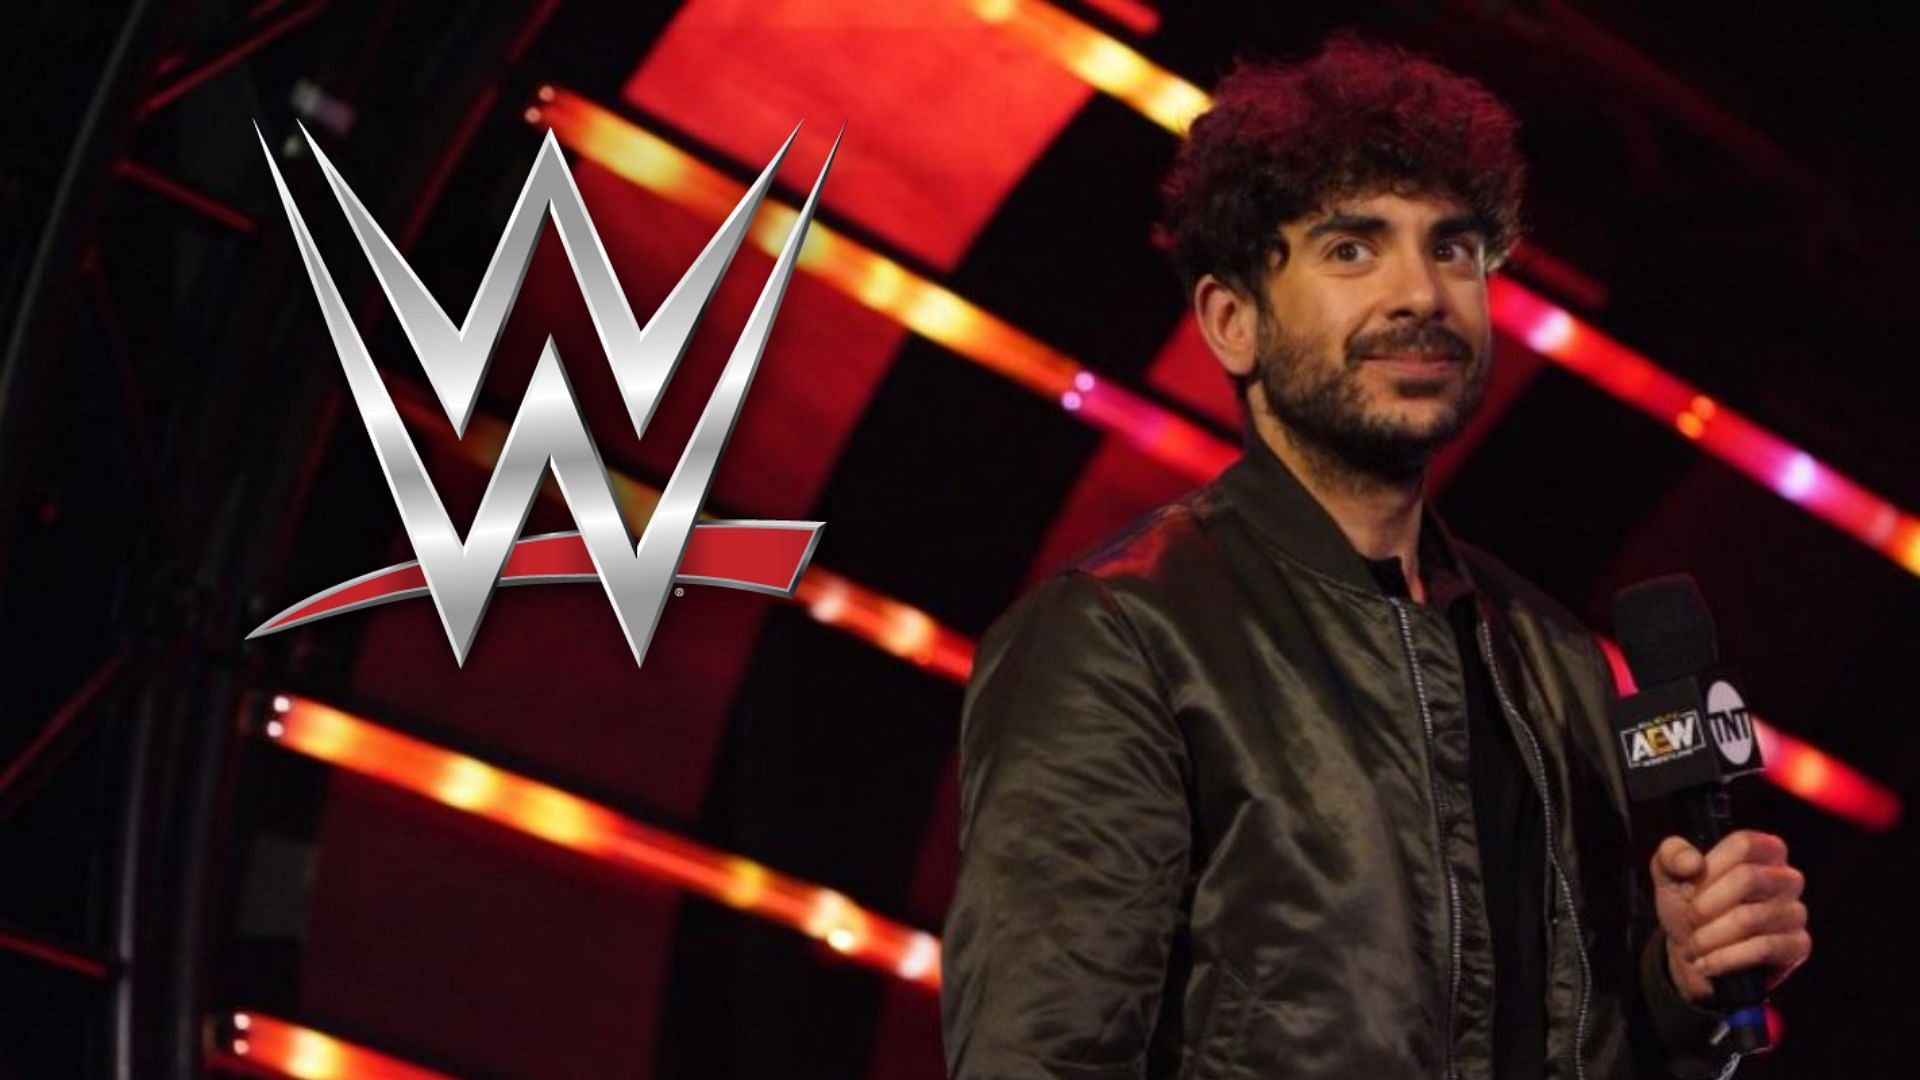 Tony Khan may be planning on bringing in another ex-WWE superstar to AEW